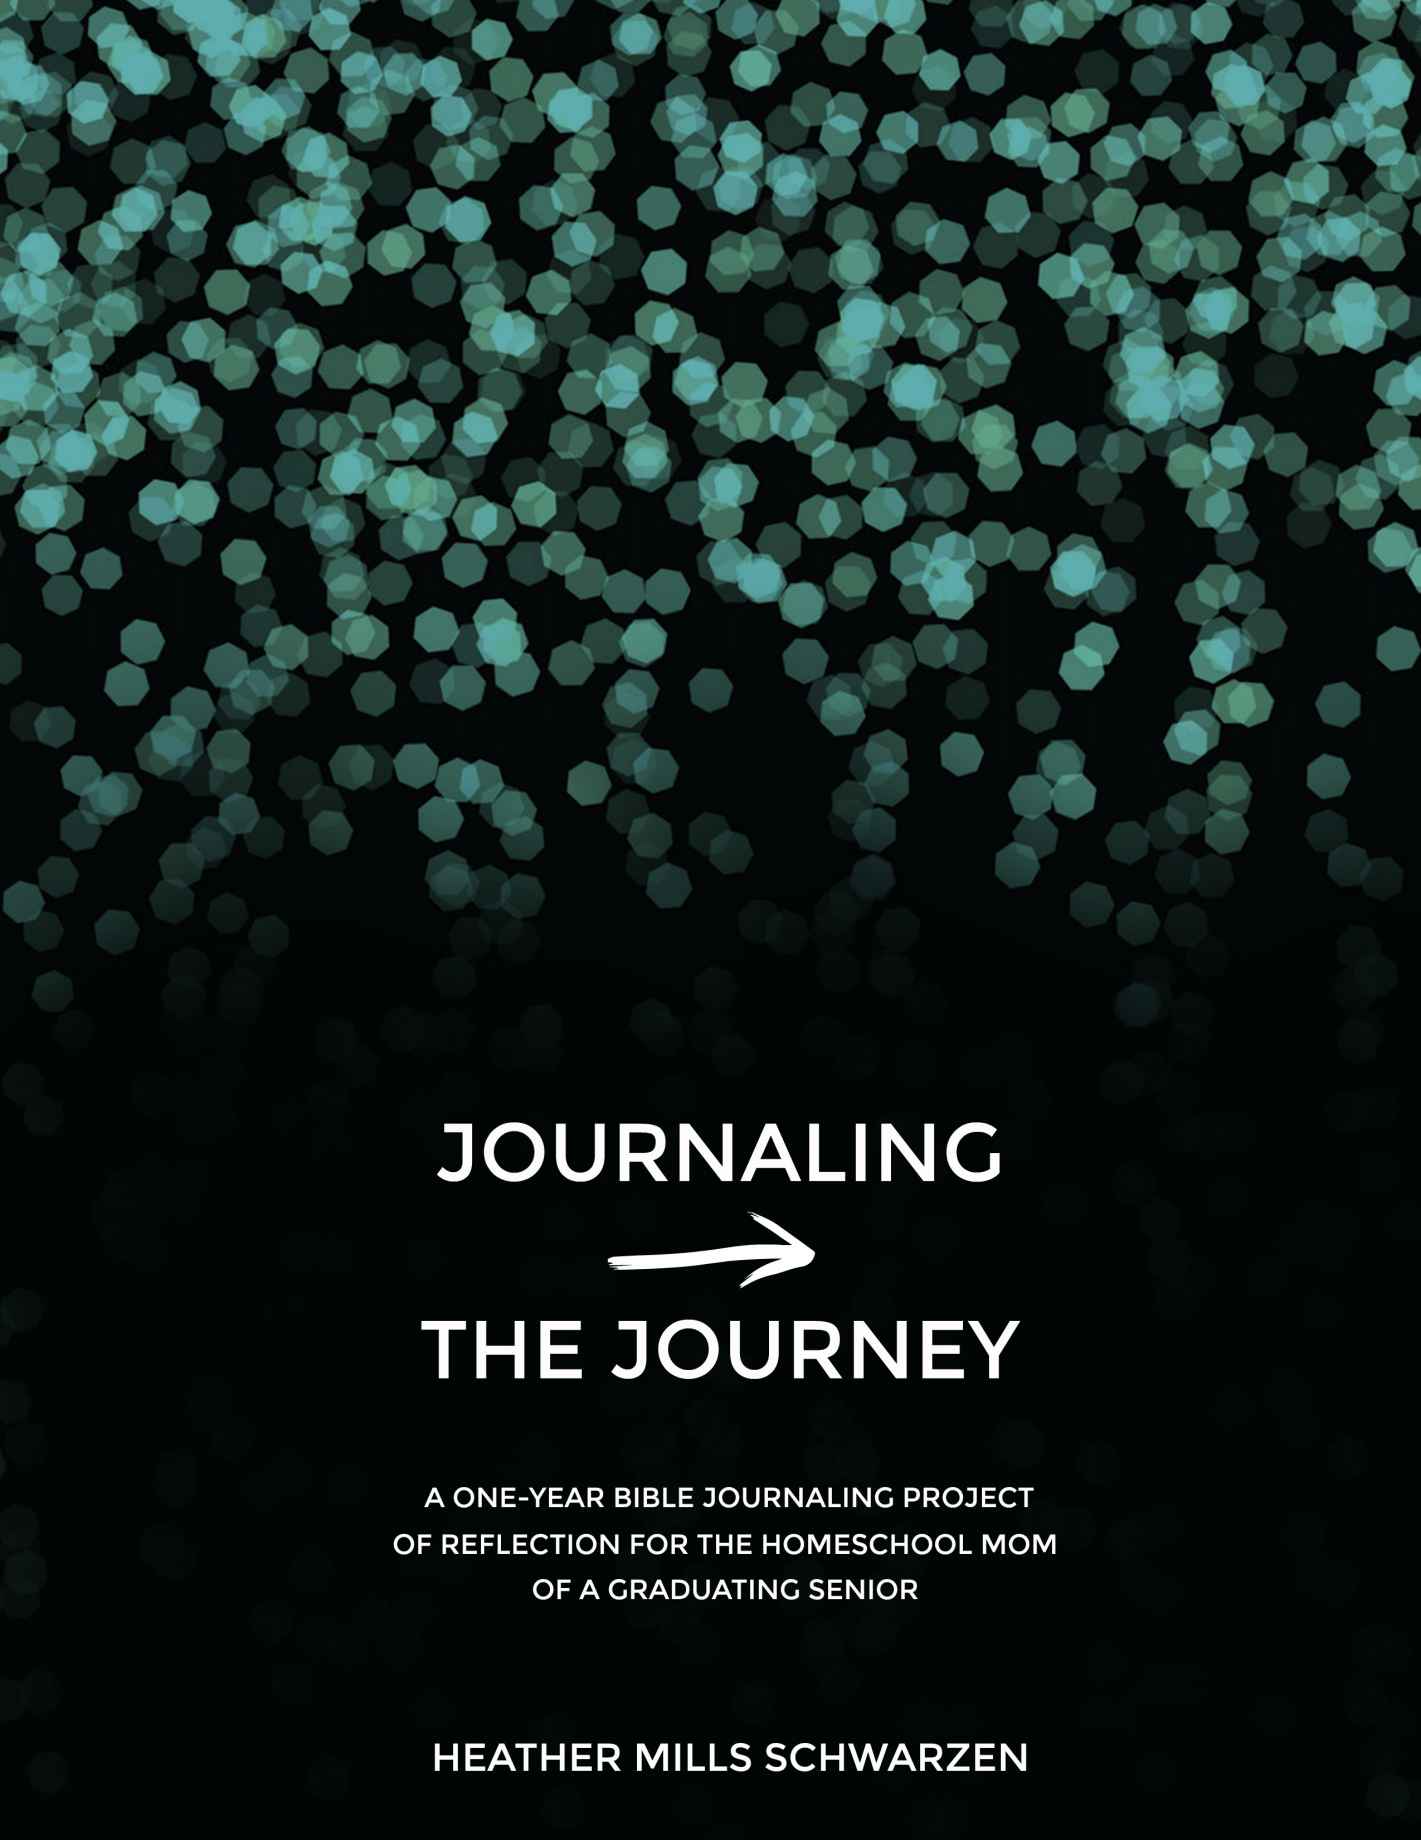 Journaling the Journey